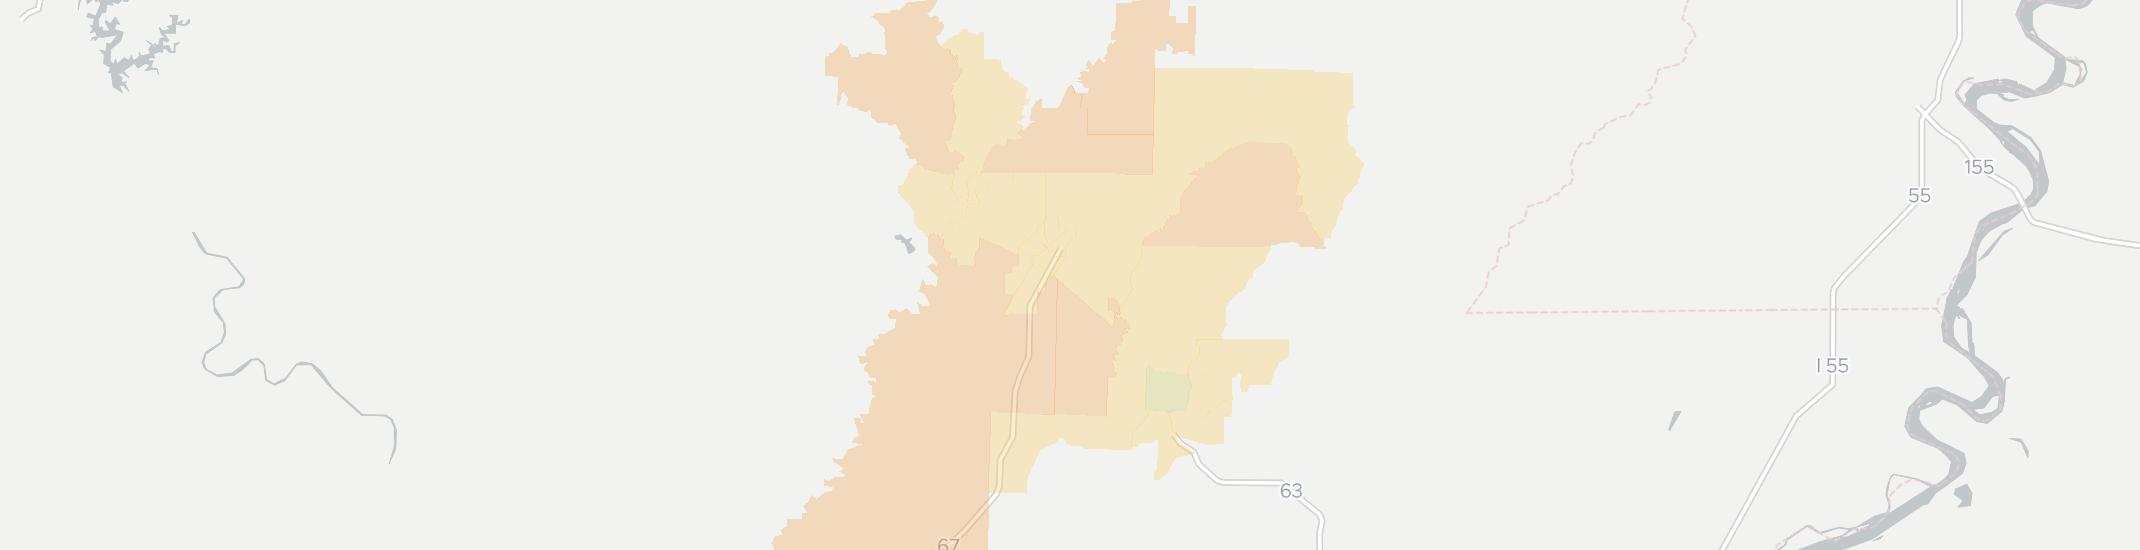 Walnut Ridge Internet Competition Map. Click for interactive map.